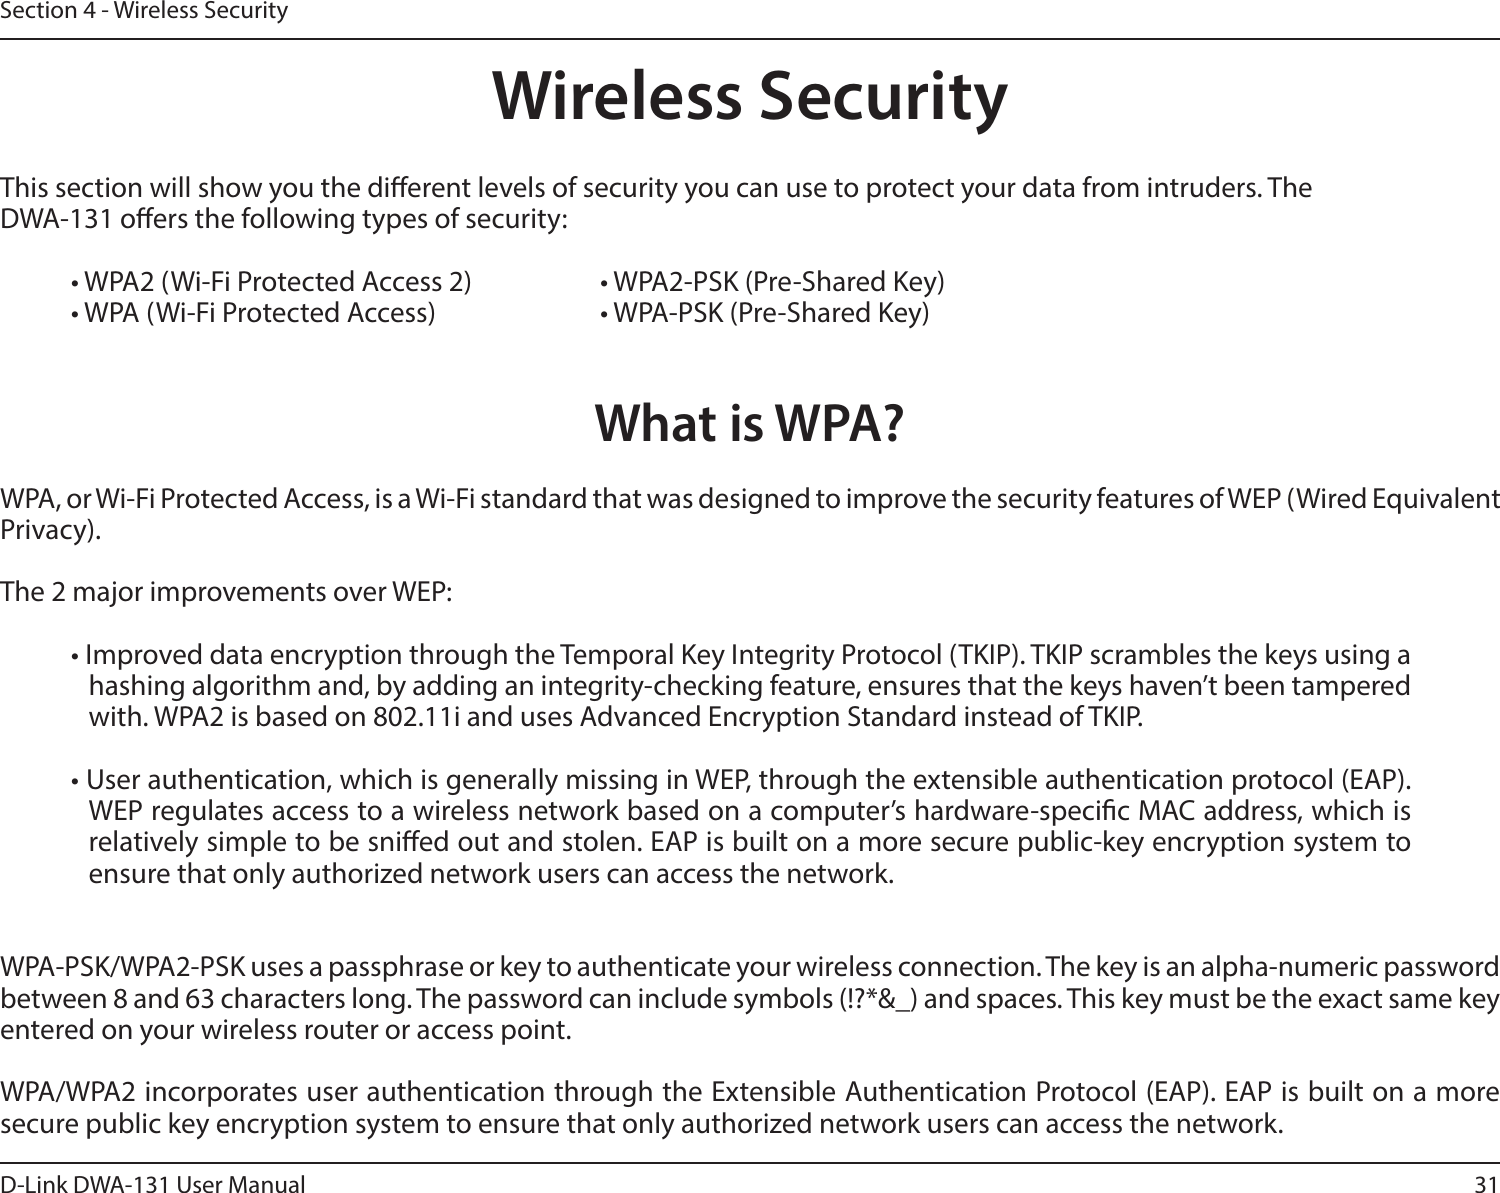 31D-Link DWA-131 User ManualSection 4 - Wireless SecurityWireless SecurityThis section will show you the dierent levels of security you can use to protect your data from intruders. The DWA-131 oers the following types of security:• WPA2 (Wi-Fi Protected Access 2)     • WPA2-PSK (Pre-Shared Key)• WPA (Wi-Fi Protected Access)      • WPA-PSK (Pre-Shared Key)What is WPA?WPA, or Wi-Fi Protected Access, is a Wi-Fi standard that was designed to improve the security features of WEP (Wired Equivalent Privacy).  The 2 major improvements over WEP: • Improved data encryption through the Temporal Key Integrity Protocol (TKIP). TKIP scrambles the keys using a hashing algorithm and, by adding an integrity-checking feature, ensures that the keys haven’t been tampered with. WPA2 is based on 802.11i and uses Advanced Encryption Standard instead of TKIP.• User authentication, which is generally missing in WEP, through the extensible authentication protocol (EAP). WEP regulates access to a wireless network based on a computer’s hardware-specic MAC address, which is relatively simple to be snied out and stolen. EAP is built on a more secure public-key encryption system to ensure that only authorized network users can access the network.WPA-PSK/WPA2-PSK uses a passphrase or key to authenticate your wireless connection. The key is an alpha-numeric password between 8 and 63 characters long. The password can include symbols (!?*&amp;_) and spaces. This key must be the exact same key entered on your wireless router or access point.WPA/WPA2 incorporates user authentication through the Extensible Authentication Protocol (EAP). EAP is built on a more secure public key encryption system to ensure that only authorized network users can access the network.